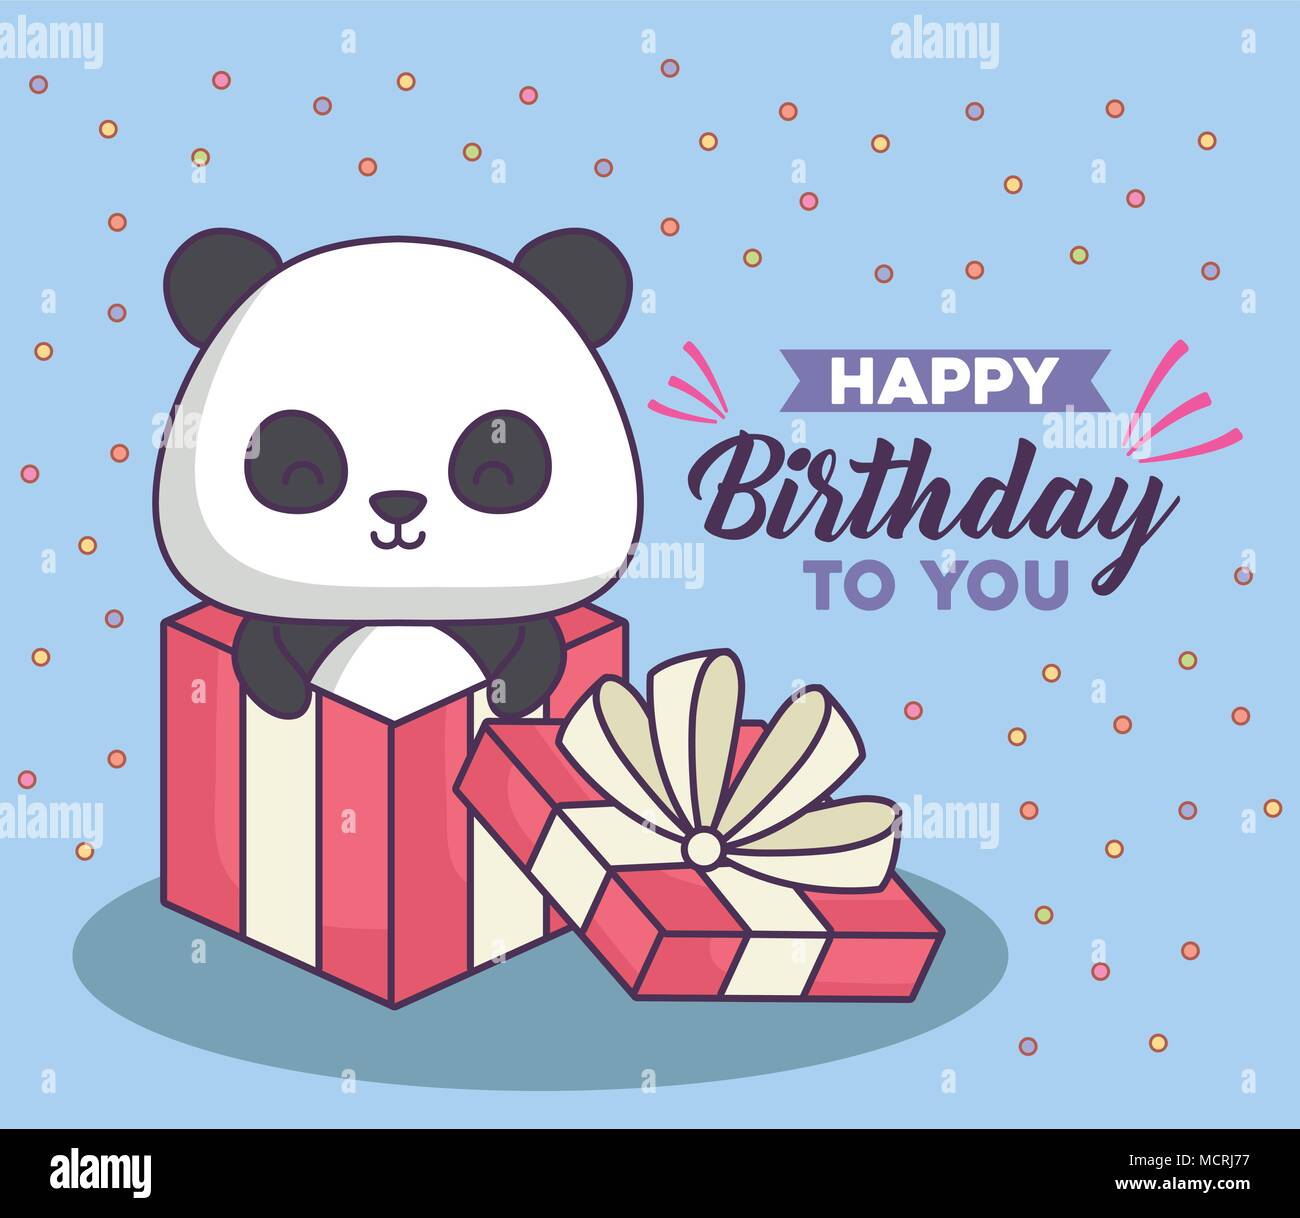 happy birthday design with gift box with cute panda bear icon over ...